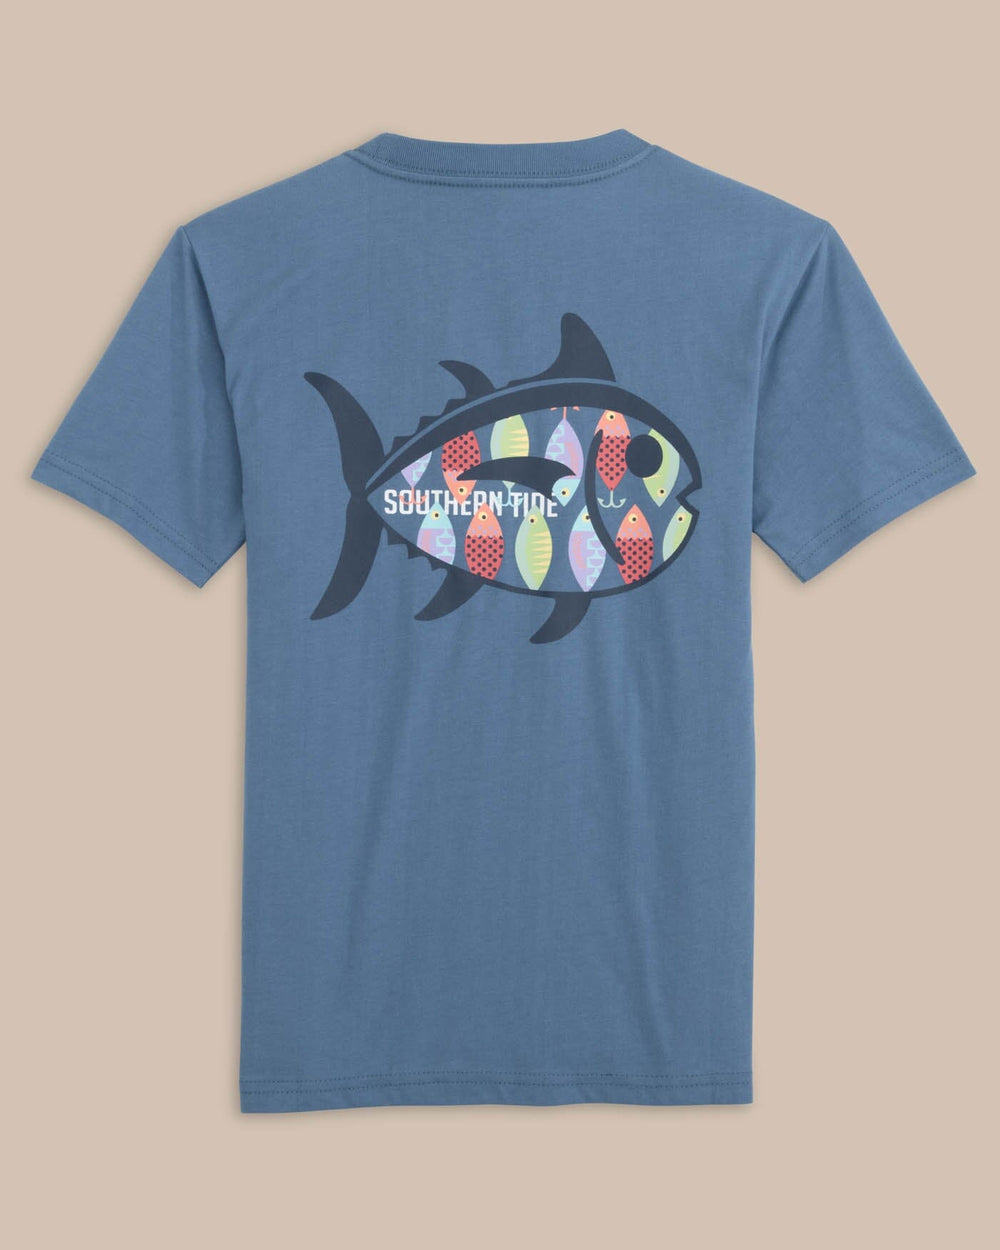 The back view of the Southern Tide Youth Skipjack Lure Fill Short Sleeve T-shirt by Southern Tide - Coronet Blue